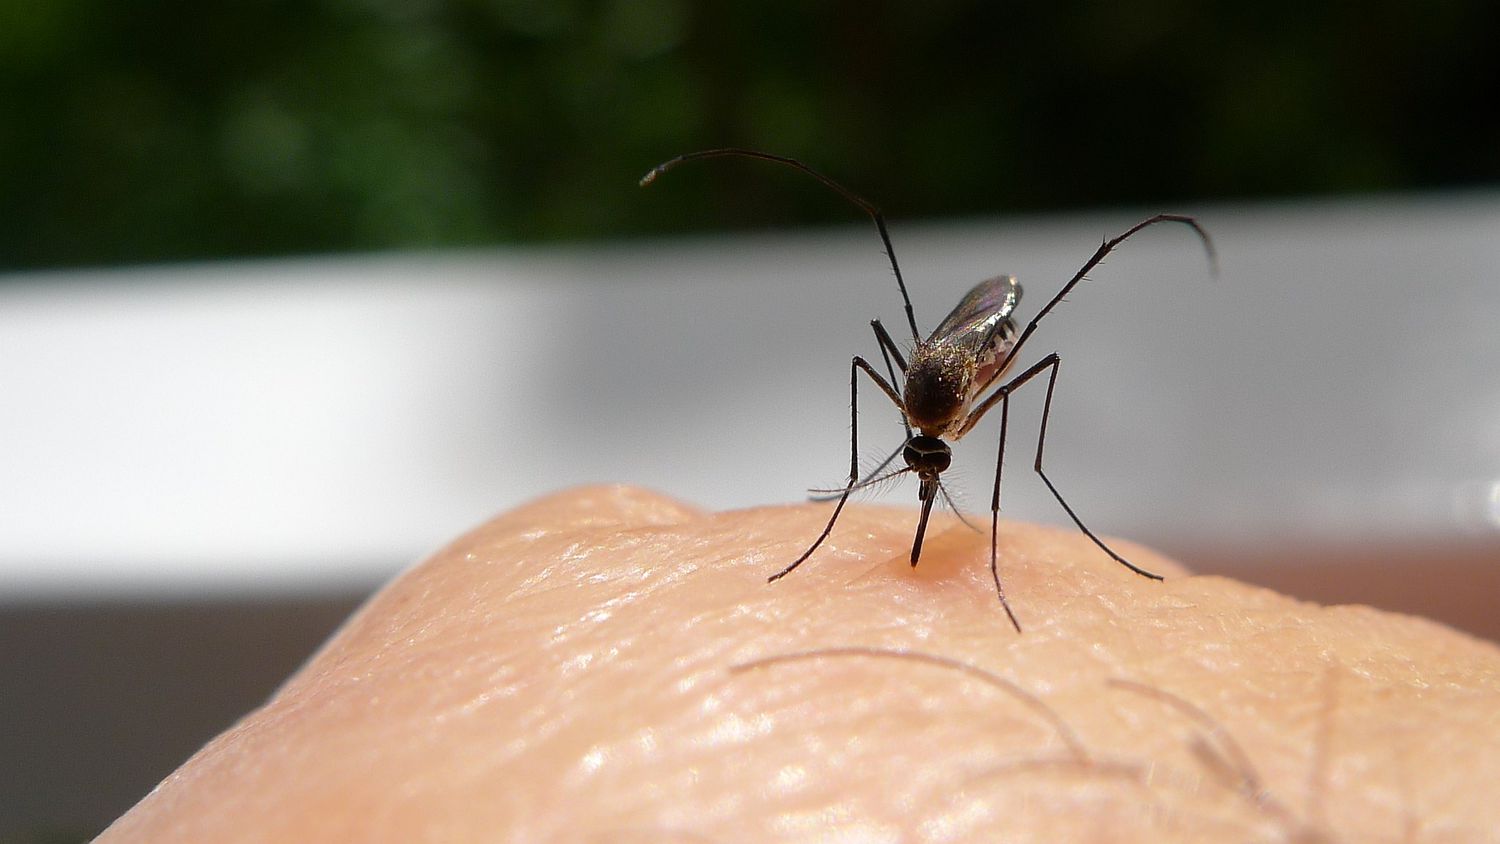 Do Mosquito Bites Attract More Mosquitoes?